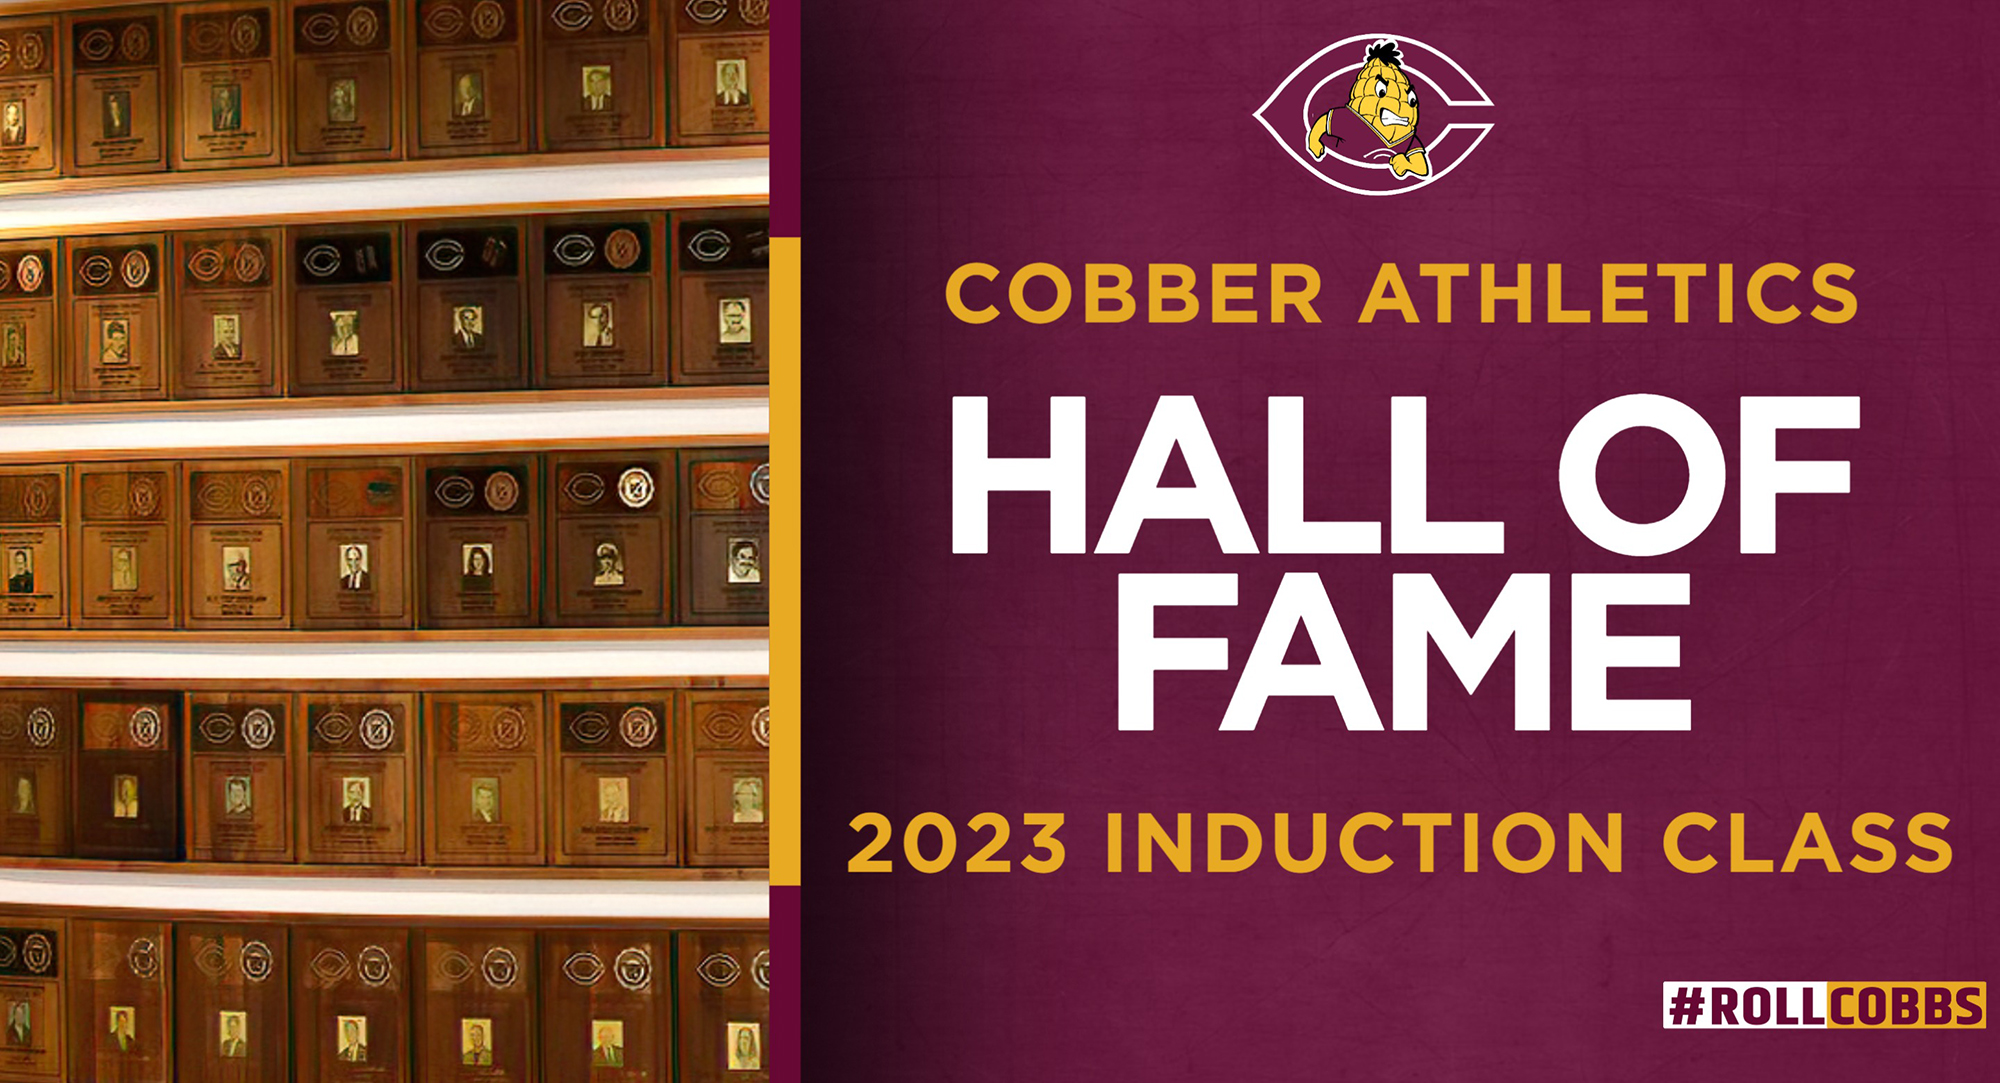 Athletic Director Rachel Bergeson announced the 2023 Cobber Athletics Hall of Fame class which includes five former standout student-athletes.